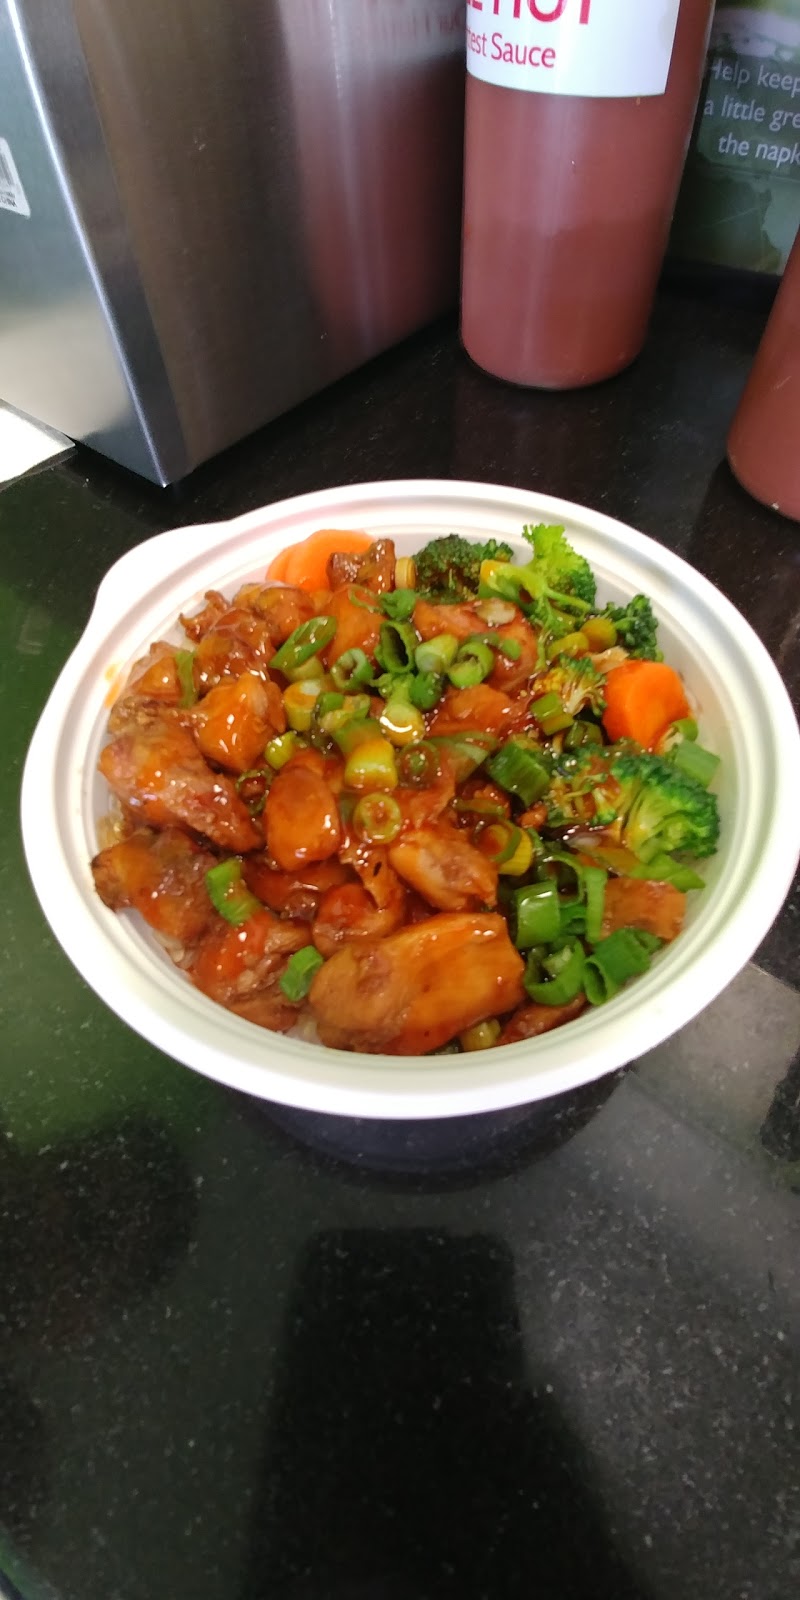 The Flame Broiler | 4633 Candlewood St, Lakewood, CA 90712, USA | Phone: (562) 633-9333